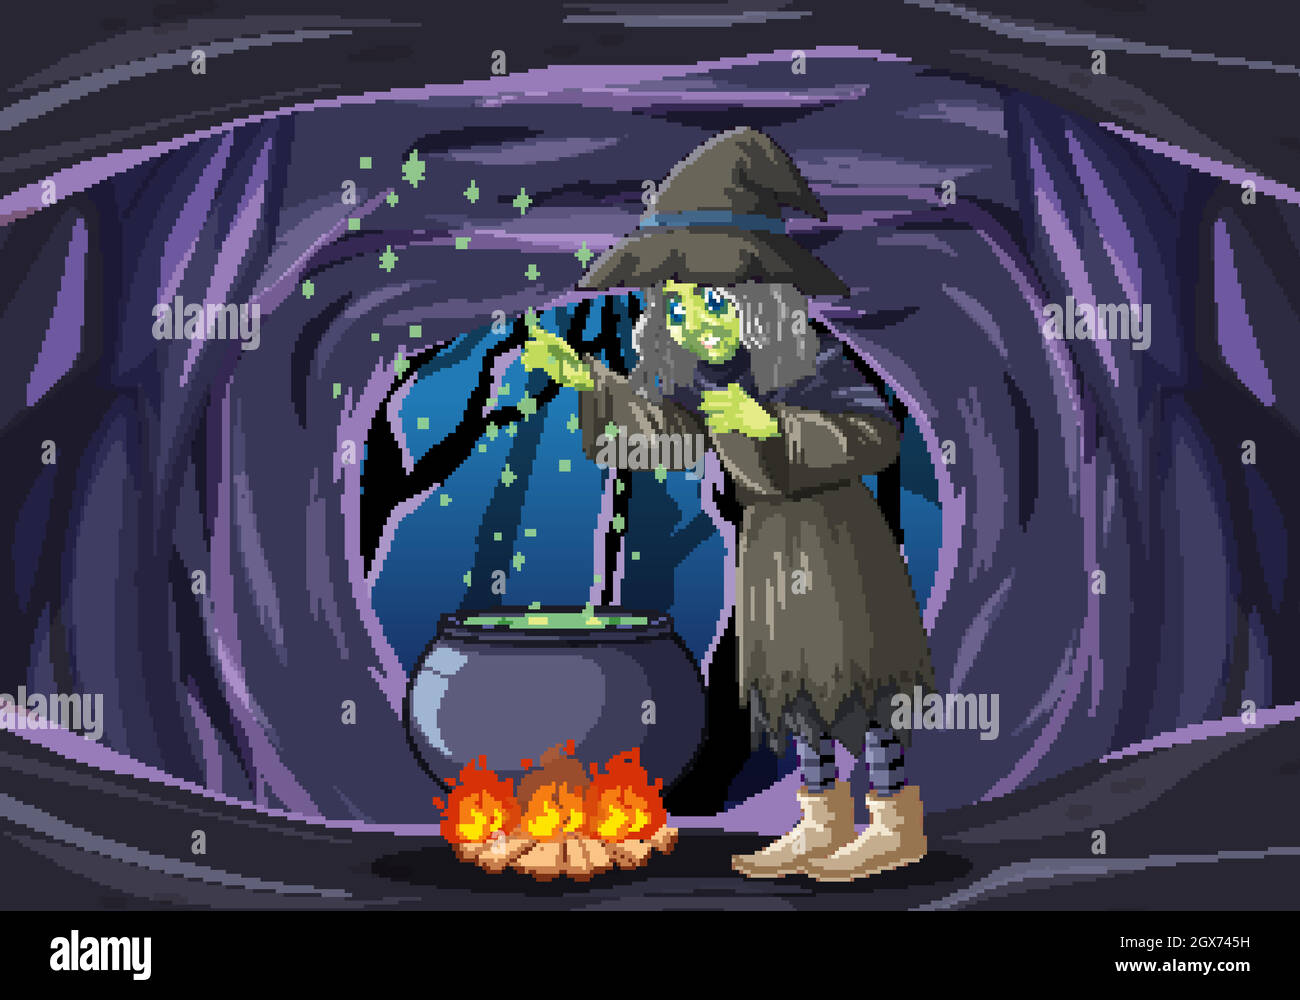 Wizard or witch with magic pot on dark cave scene Stock Vector